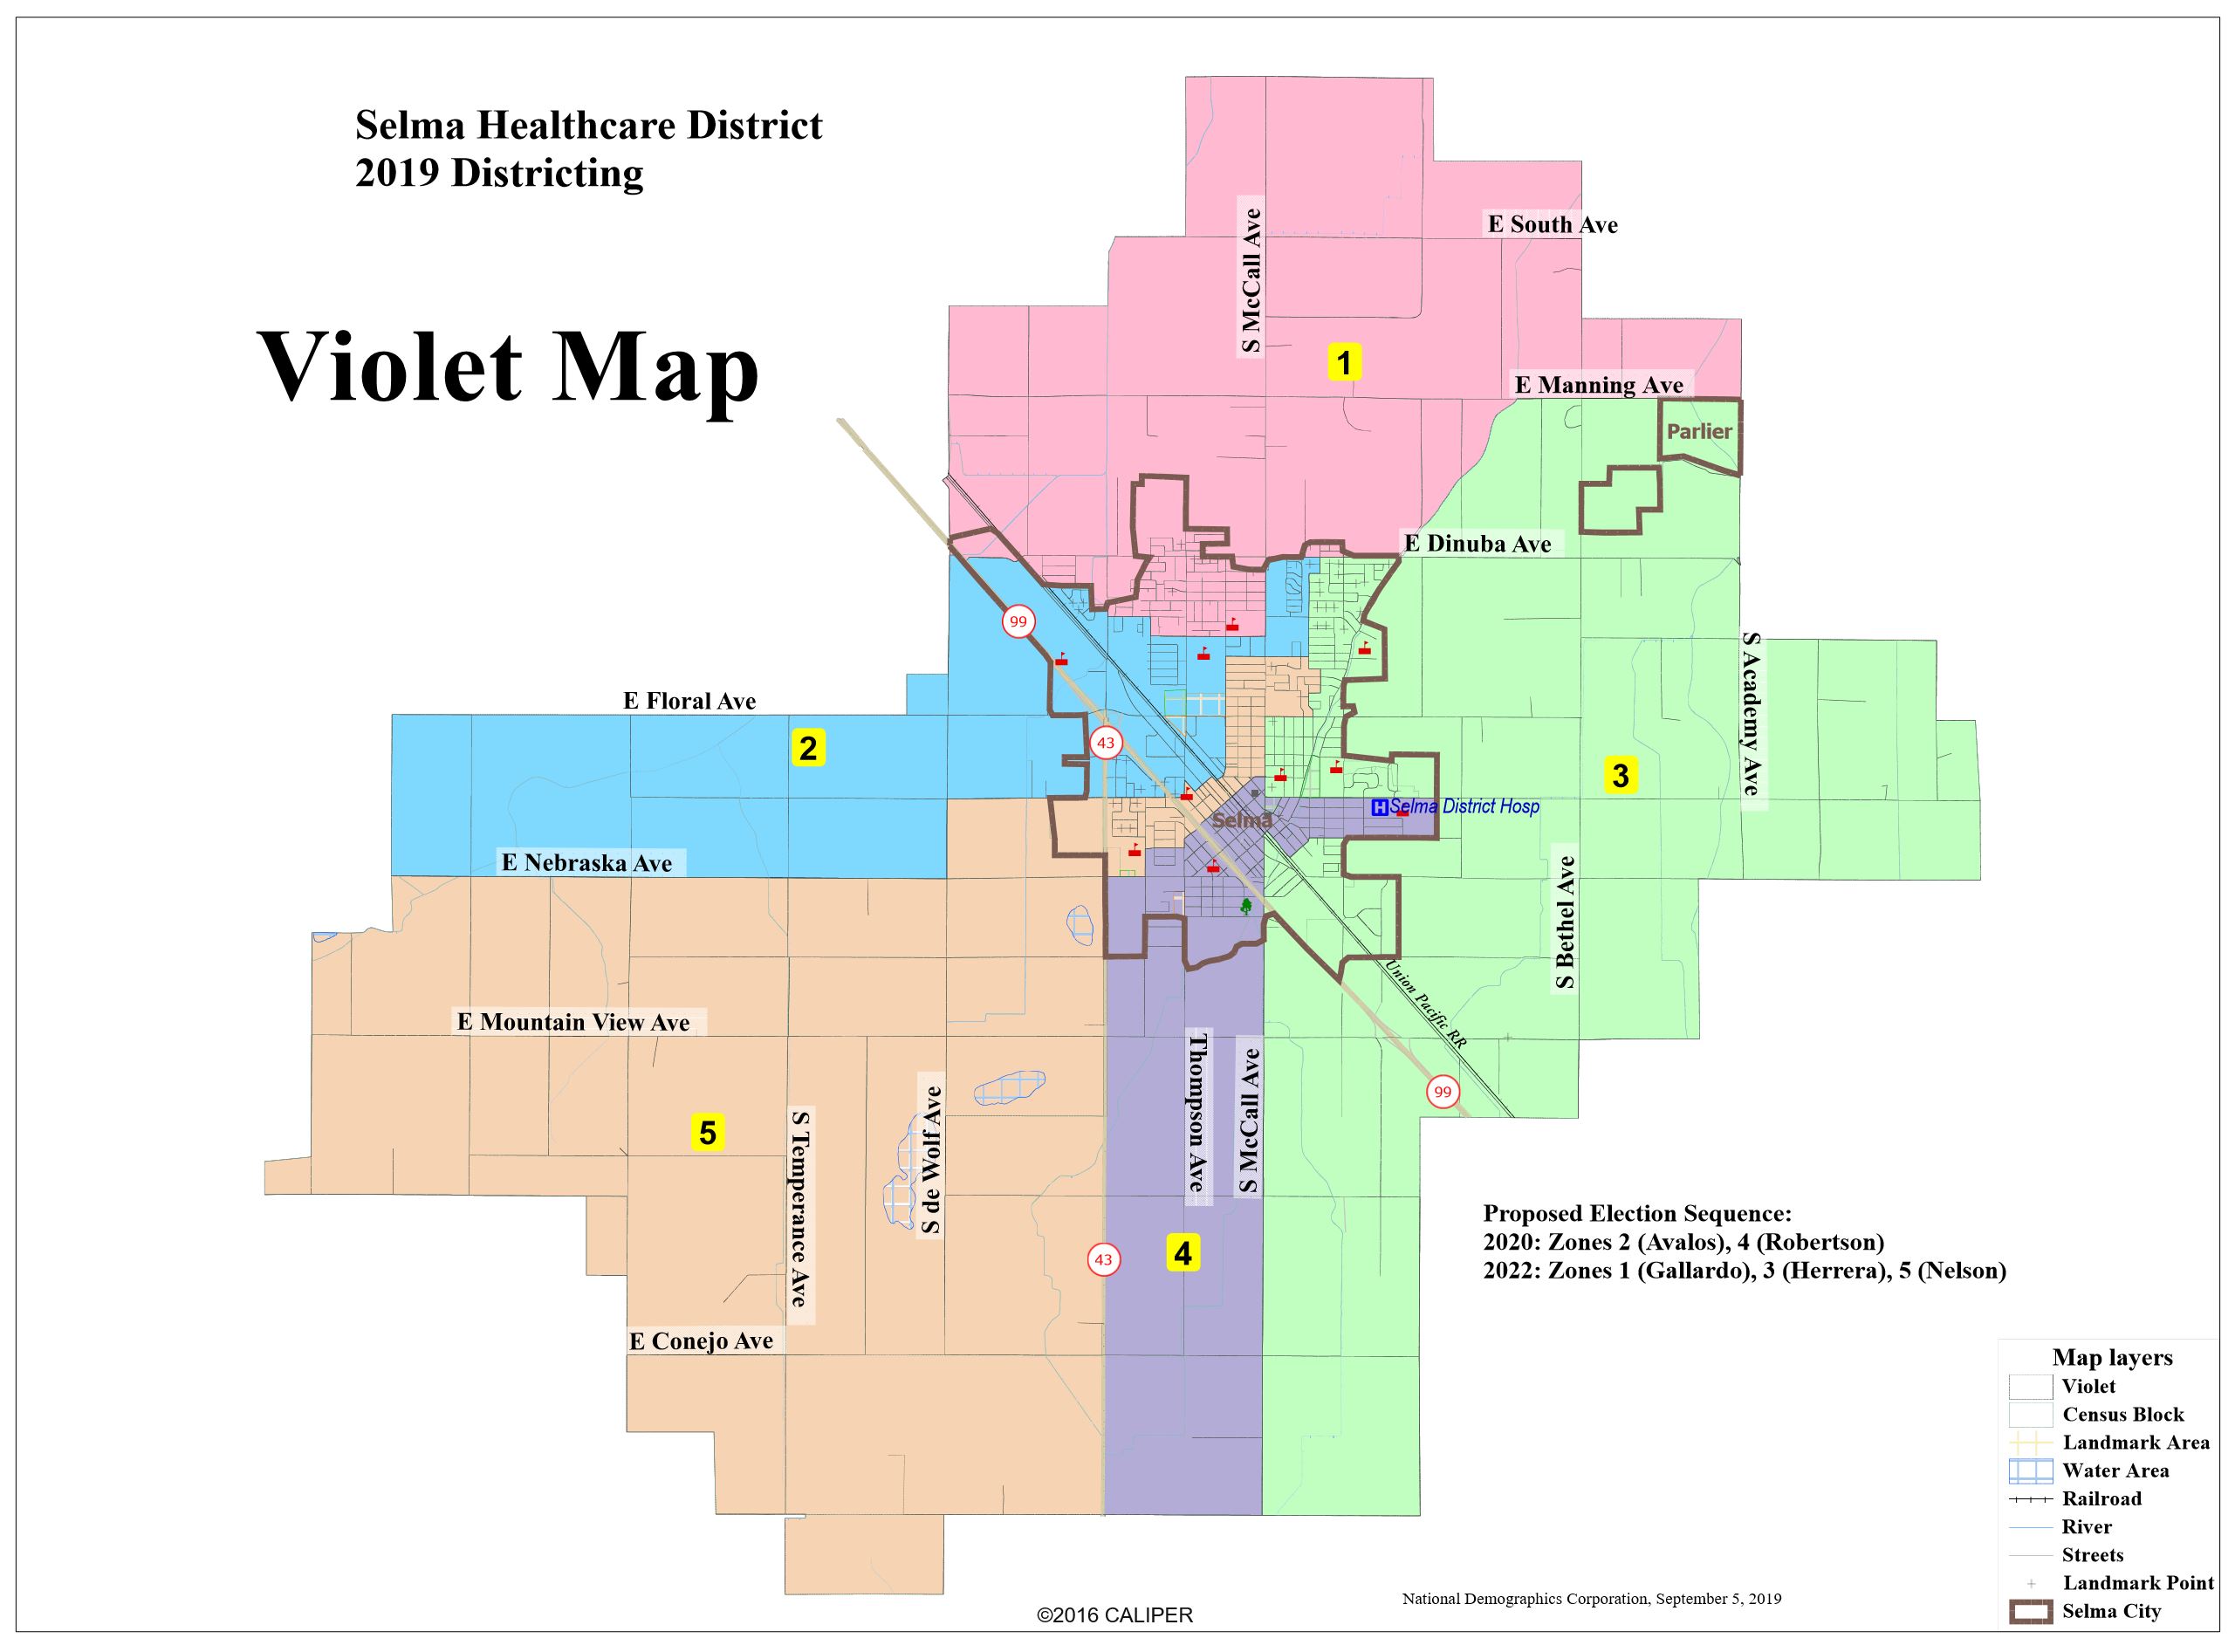 https://selmahealthcaredistrict.org/wp-content/uploads/2019/09/violet_map_page_1_of_3.jpg